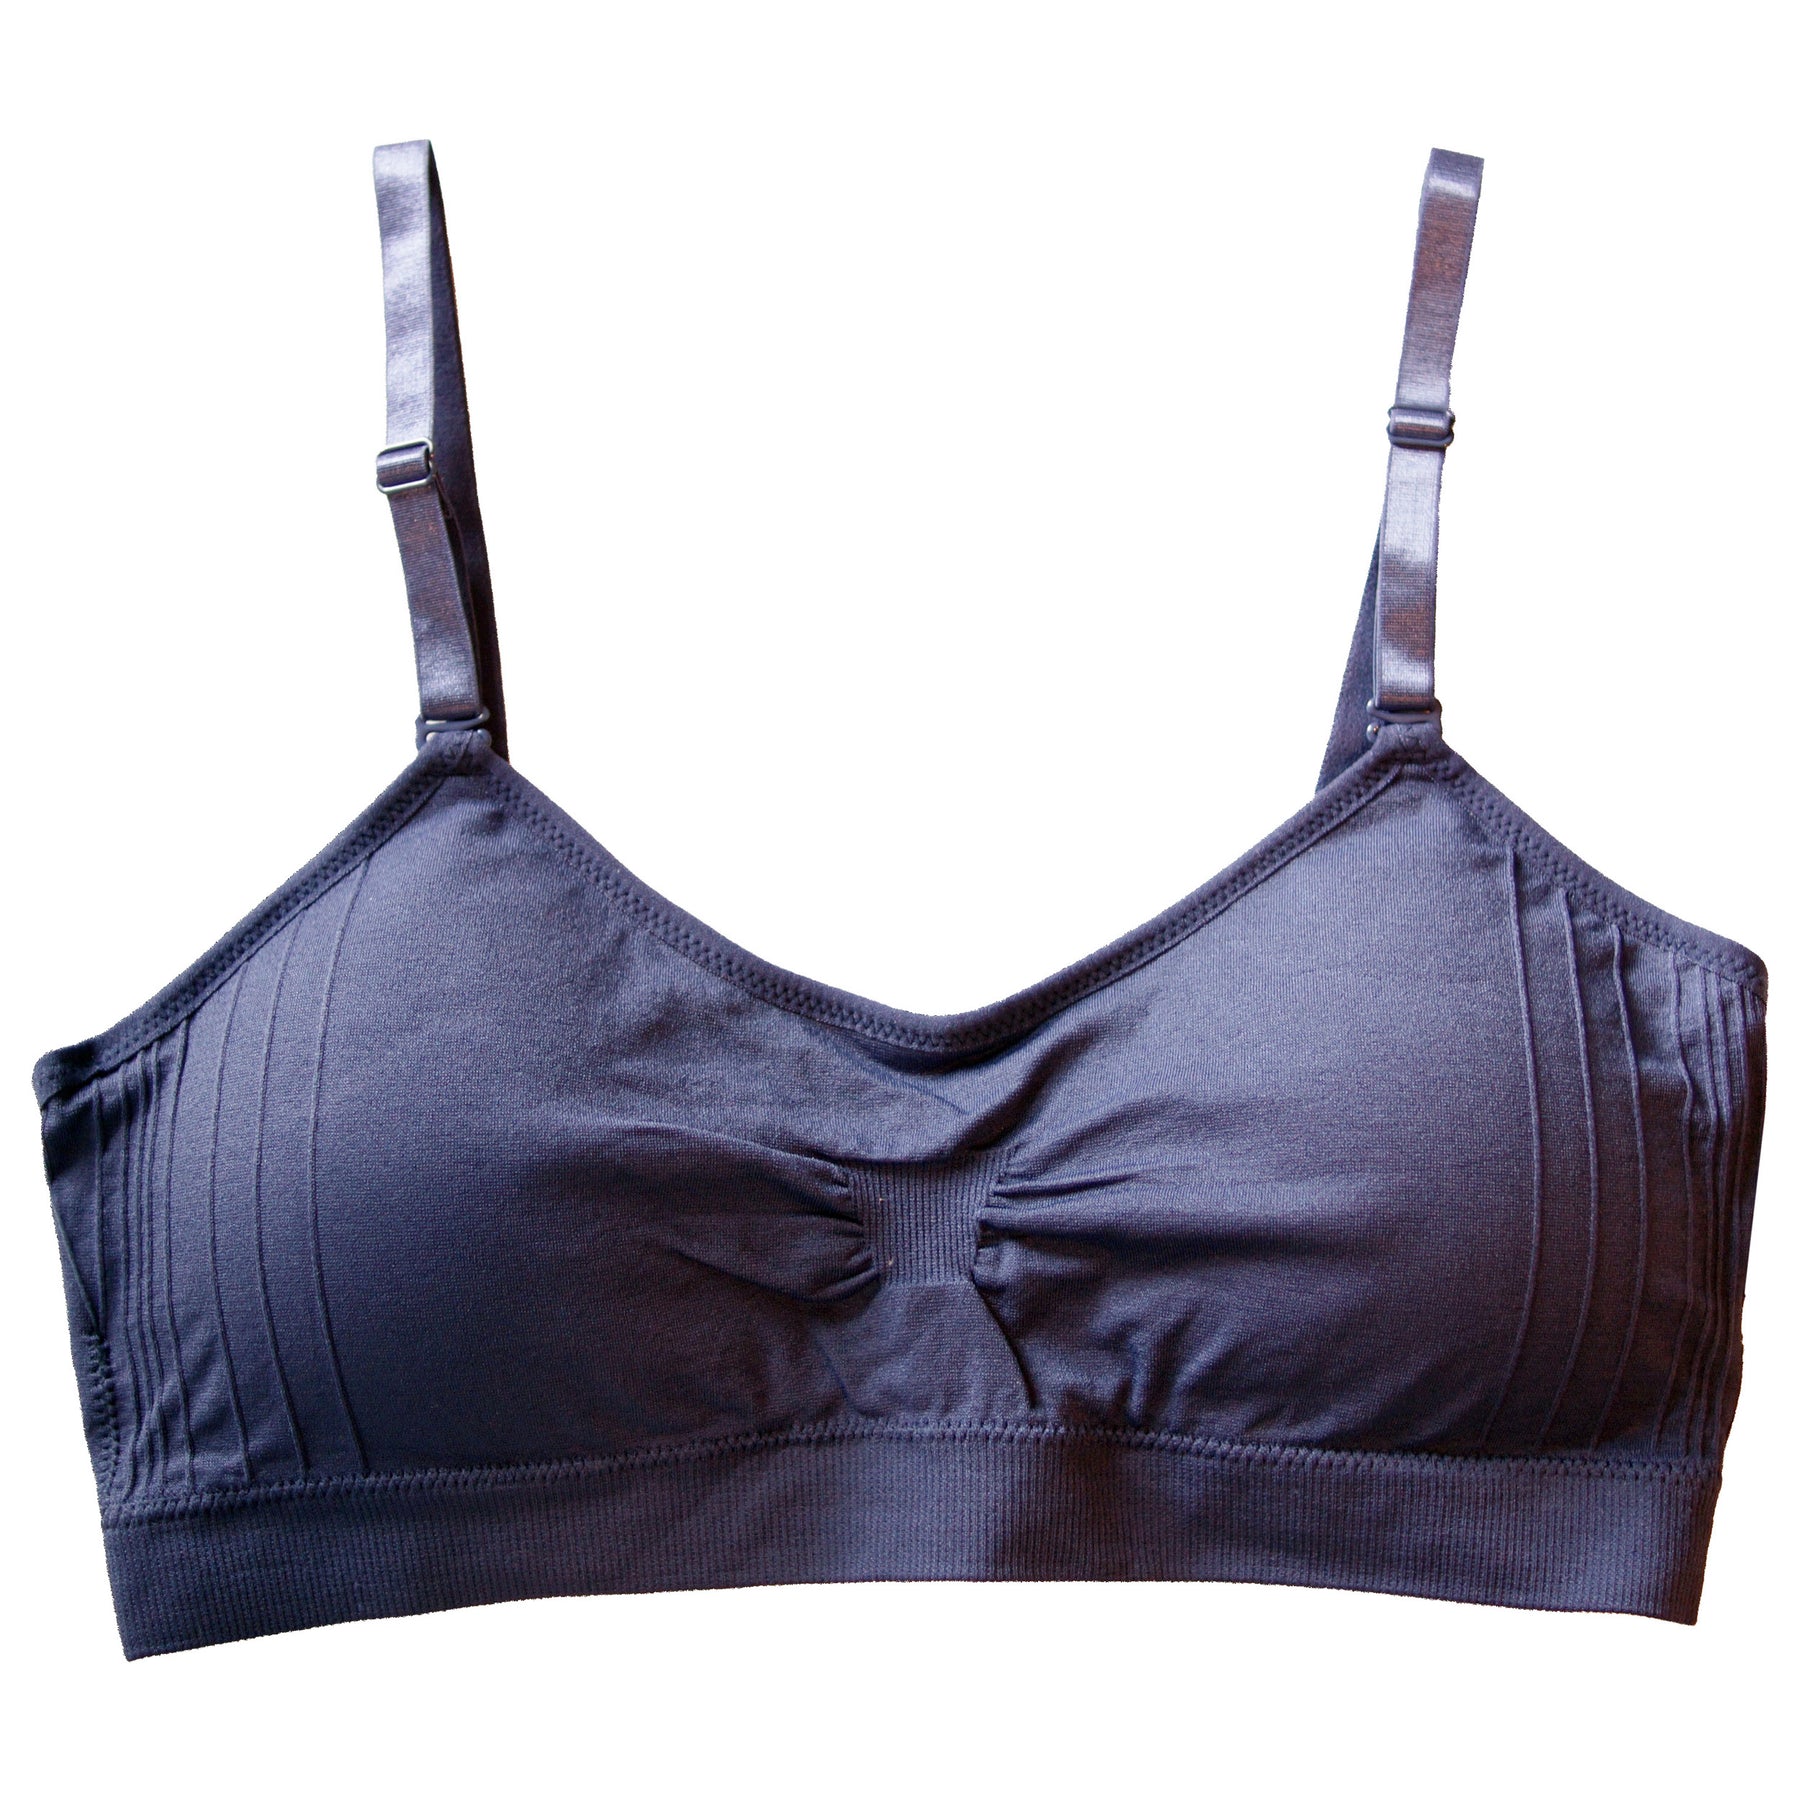 Highly Rated Coobie Bras from $10 Each Shipped (Regularly $20)